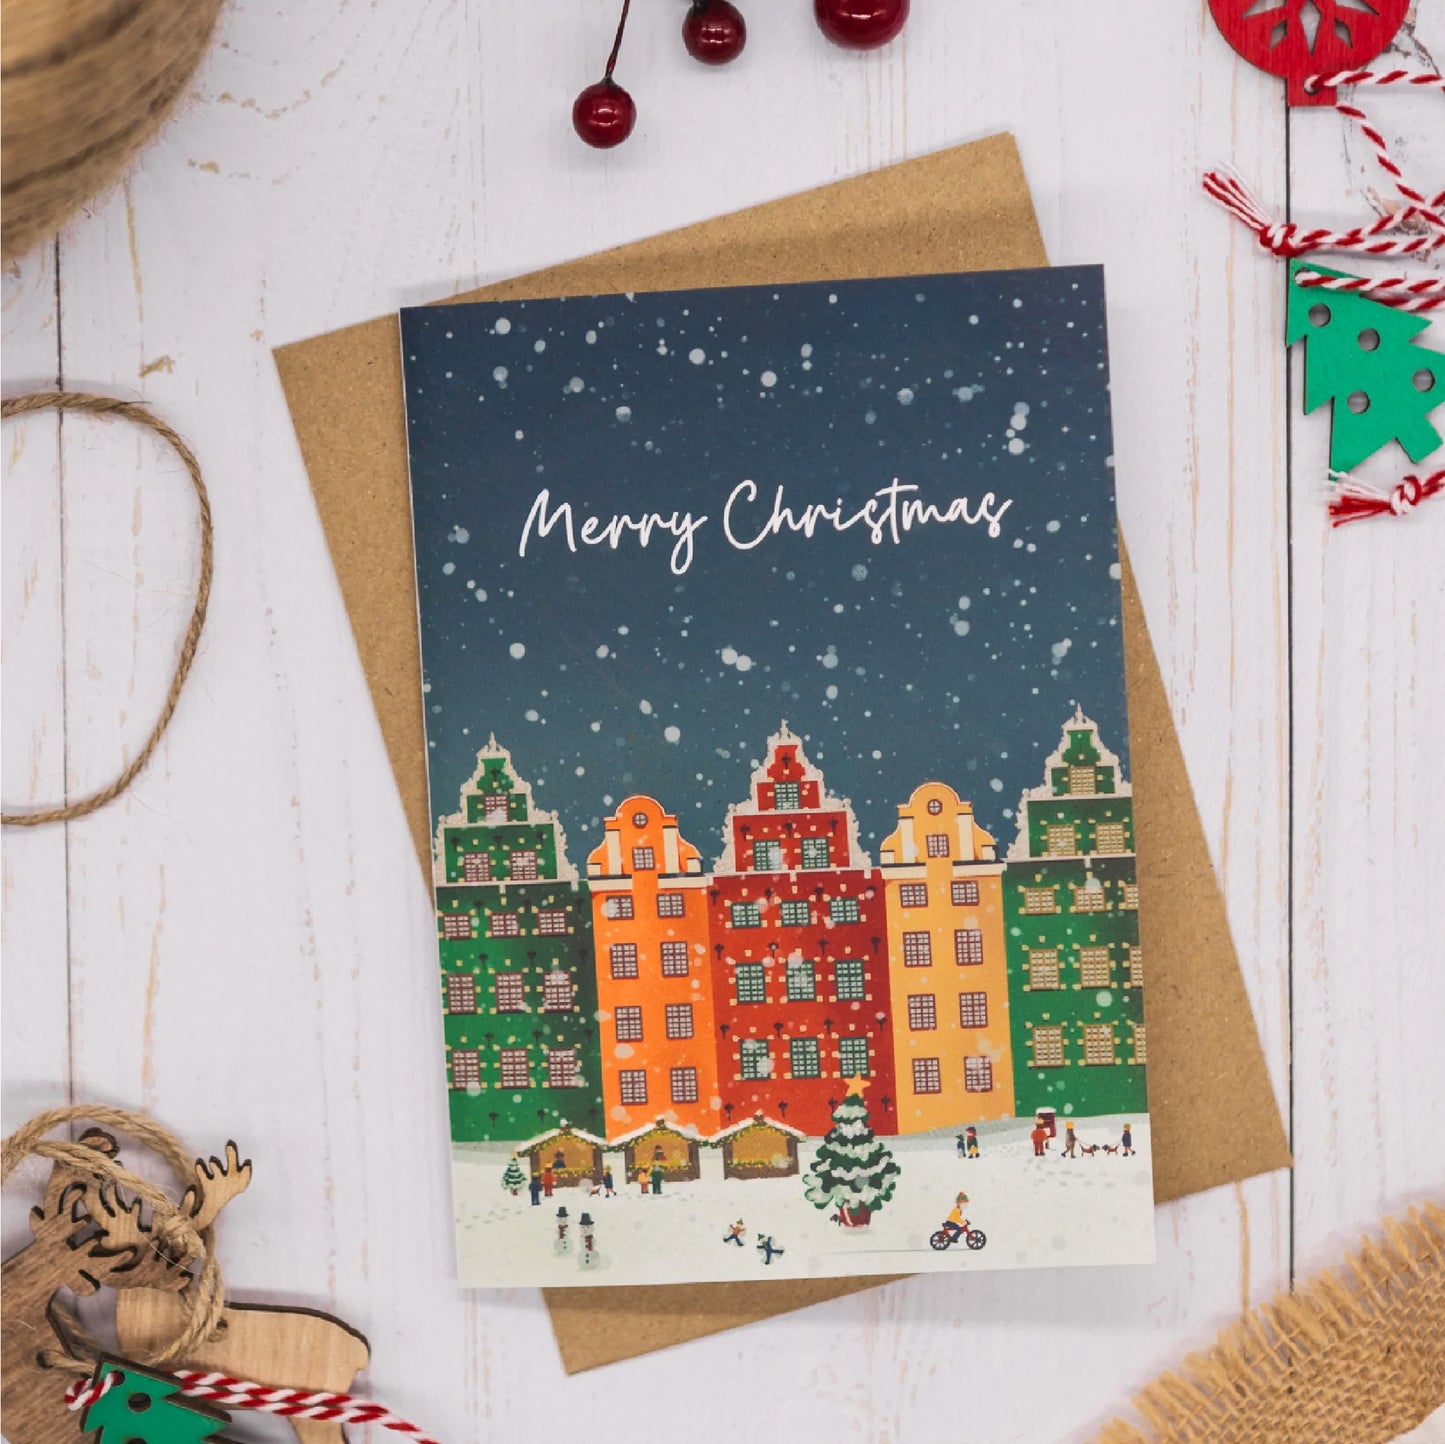 Any 5 Christmas Cards